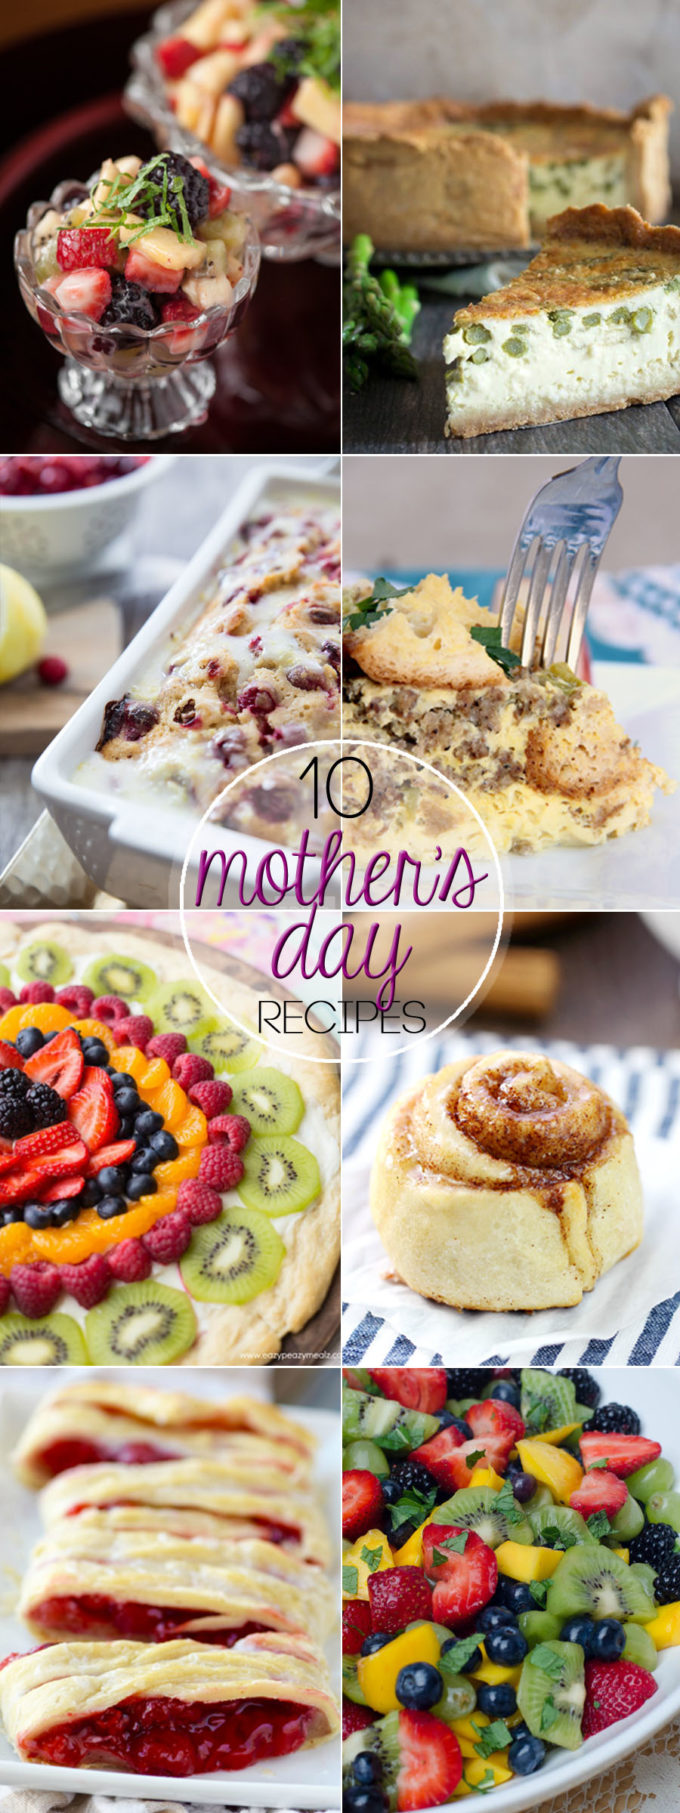 10-mothers-day-recipes-pinterest